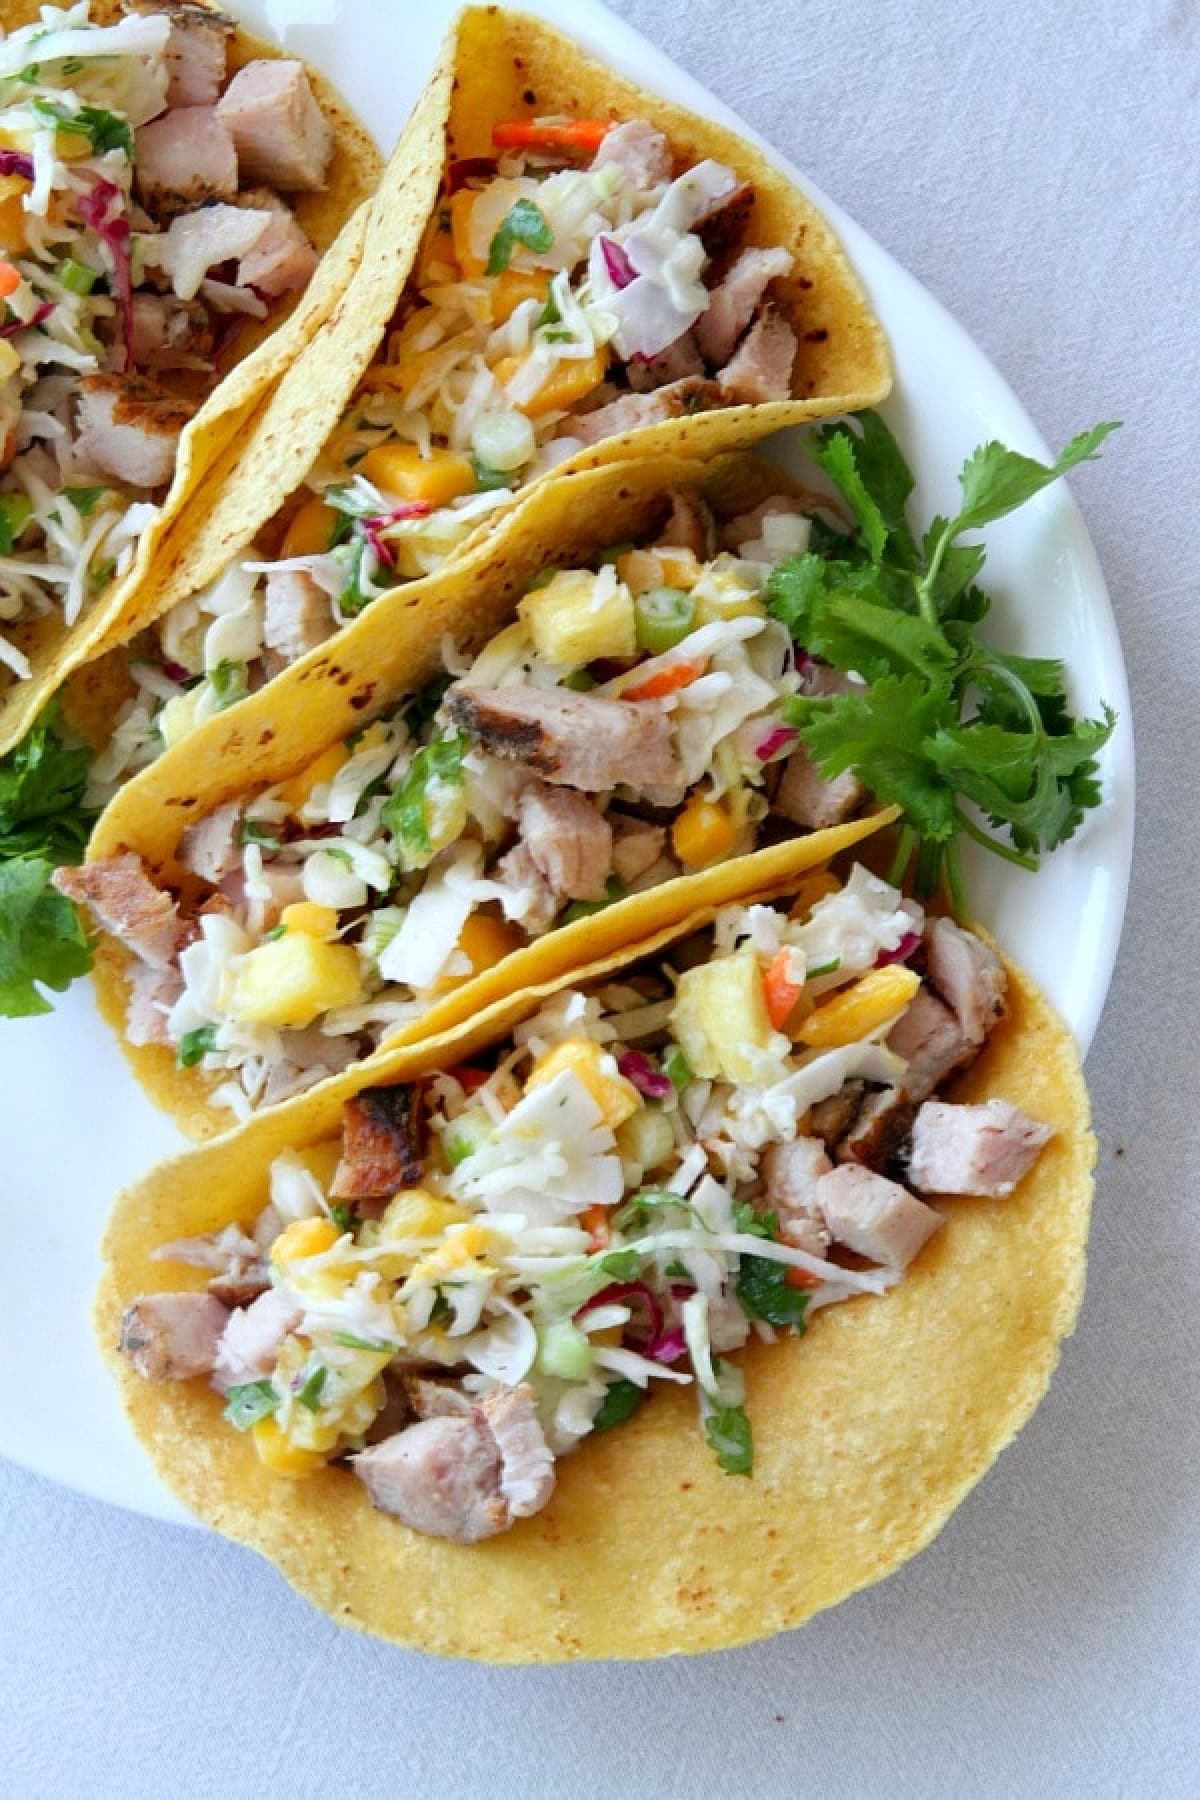 several grilled pork tacos with tropical slaw on plate